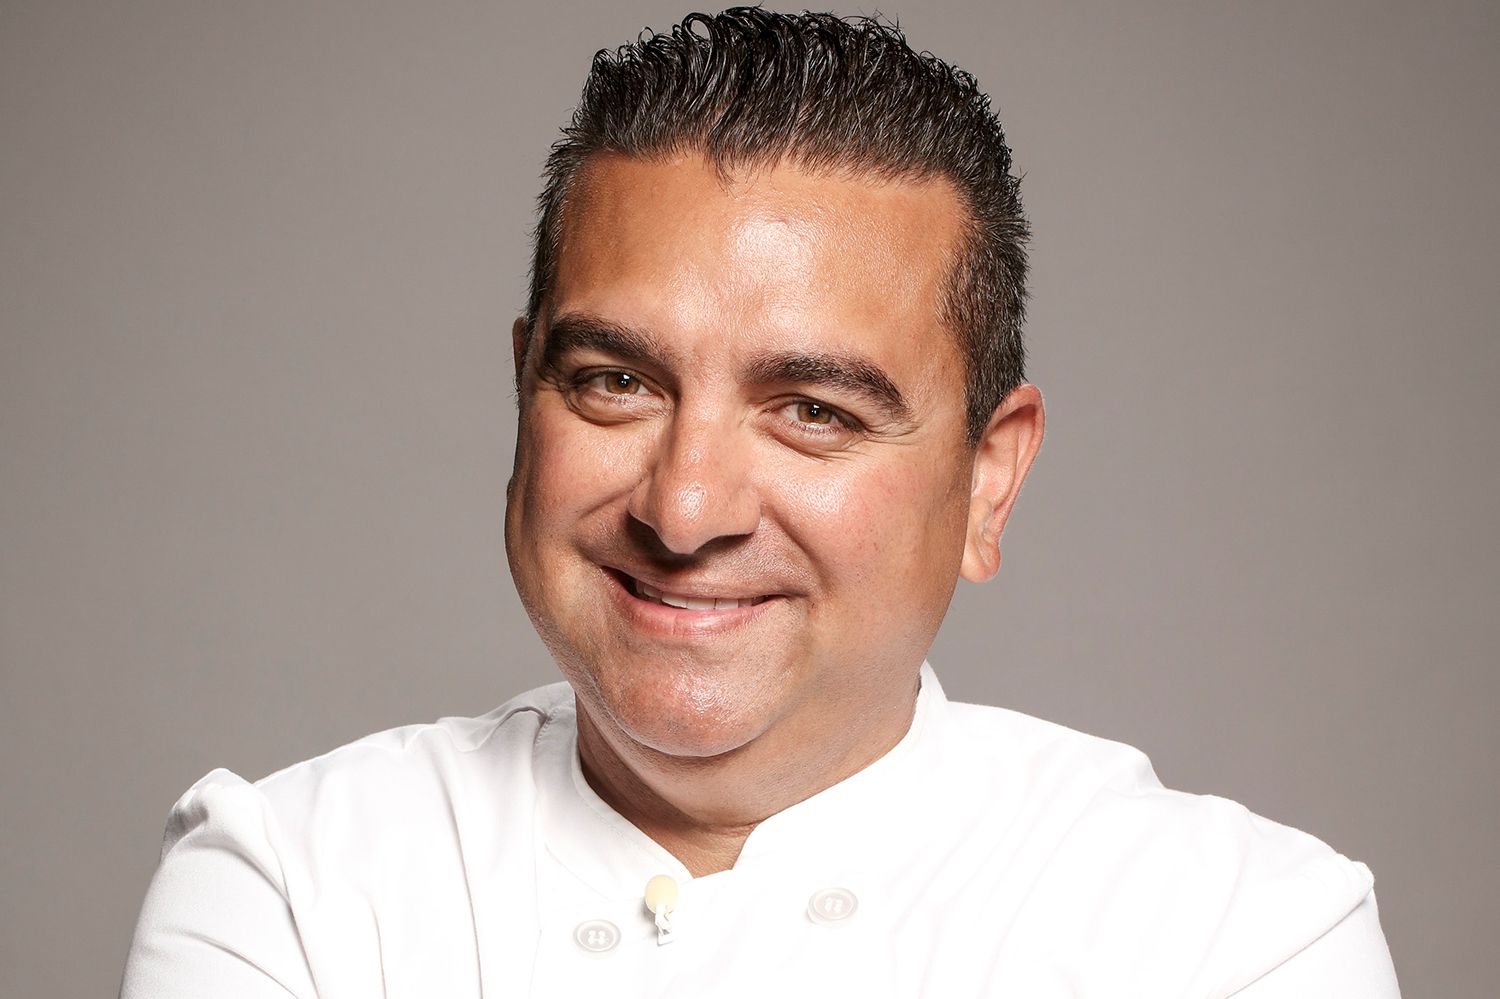 'Cake Boss' star gives injury update after impaling his hand 3 years ago thumbnail